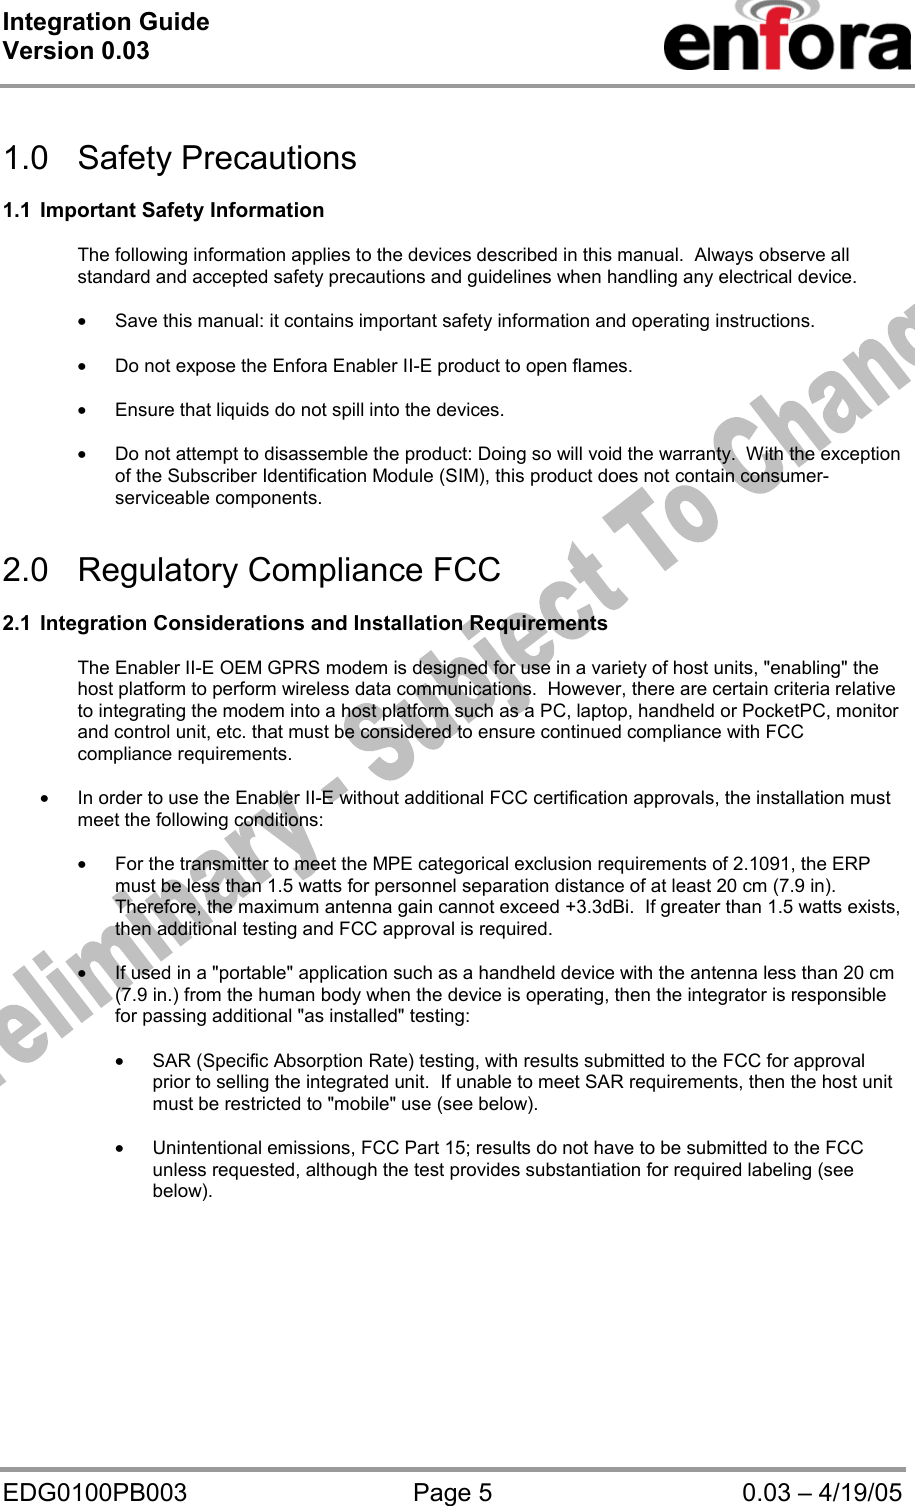 Integration Guide  Version 0.03   EDG0100PB003  Page 5  0.03 – 4/19/05  1.0 Safety Precautions  1.1  Important Safety Information  The following information applies to the devices described in this manual.  Always observe all standard and accepted safety precautions and guidelines when handling any electrical device.  • Save this manual: it contains important safety information and operating instructions.  • Do not expose the Enfora Enabler II-E product to open flames.  • Ensure that liquids do not spill into the devices.  • Do not attempt to disassemble the product: Doing so will void the warranty.  With the exception of the Subscriber Identification Module (SIM), this product does not contain consumer-serviceable components.   2.0  Regulatory Compliance FCC   2.1  Integration Considerations and Installation Requirements  The Enabler II-E OEM GPRS modem is designed for use in a variety of host units, &quot;enabling&quot; the host platform to perform wireless data communications.  However, there are certain criteria relative to integrating the modem into a host platform such as a PC, laptop, handheld or PocketPC, monitor and control unit, etc. that must be considered to ensure continued compliance with FCC compliance requirements.  • In order to use the Enabler II-E without additional FCC certification approvals, the installation must meet the following conditions:  • For the transmitter to meet the MPE categorical exclusion requirements of 2.1091, the ERP must be less than 1.5 watts for personnel separation distance of at least 20 cm (7.9 in).  Therefore, the maximum antenna gain cannot exceed +3.3dBi.  If greater than 1.5 watts exists, then additional testing and FCC approval is required.  • If used in a &quot;portable&quot; application such as a handheld device with the antenna less than 20 cm (7.9 in.) from the human body when the device is operating, then the integrator is responsible for passing additional &quot;as installed&quot; testing:  • SAR (Specific Absorption Rate) testing, with results submitted to the FCC for approval prior to selling the integrated unit.  If unable to meet SAR requirements, then the host unit must be restricted to &quot;mobile&quot; use (see below).  • Unintentional emissions, FCC Part 15; results do not have to be submitted to the FCC unless requested, although the test provides substantiation for required labeling (see below).   